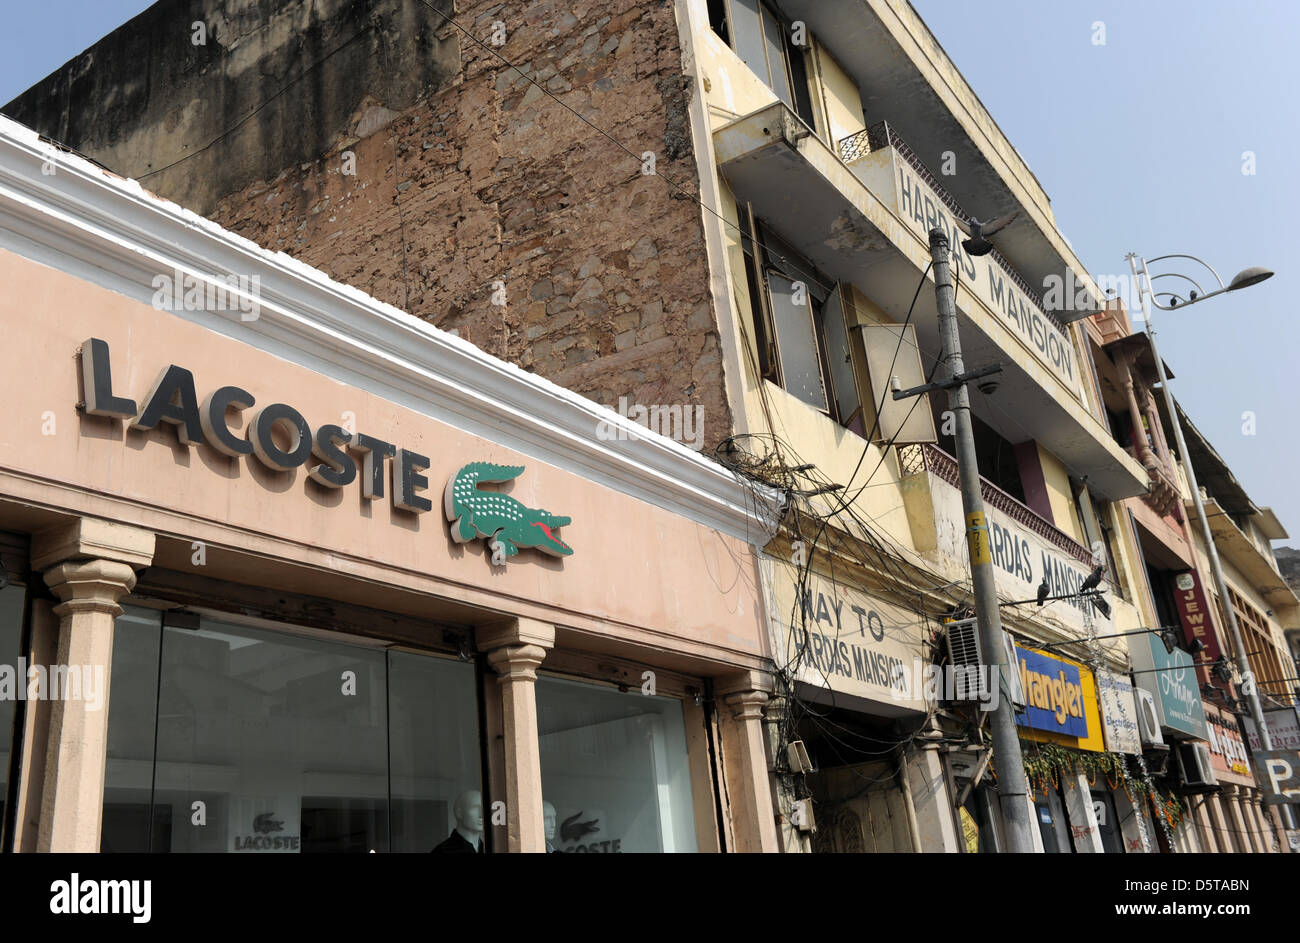 The logo of clothing manufacturer Lacoste hangs above the entrance to a  shop in Jaipur, India, 17 November 2012. Photo: Jens Kalaene Stock Photo -  Alamy